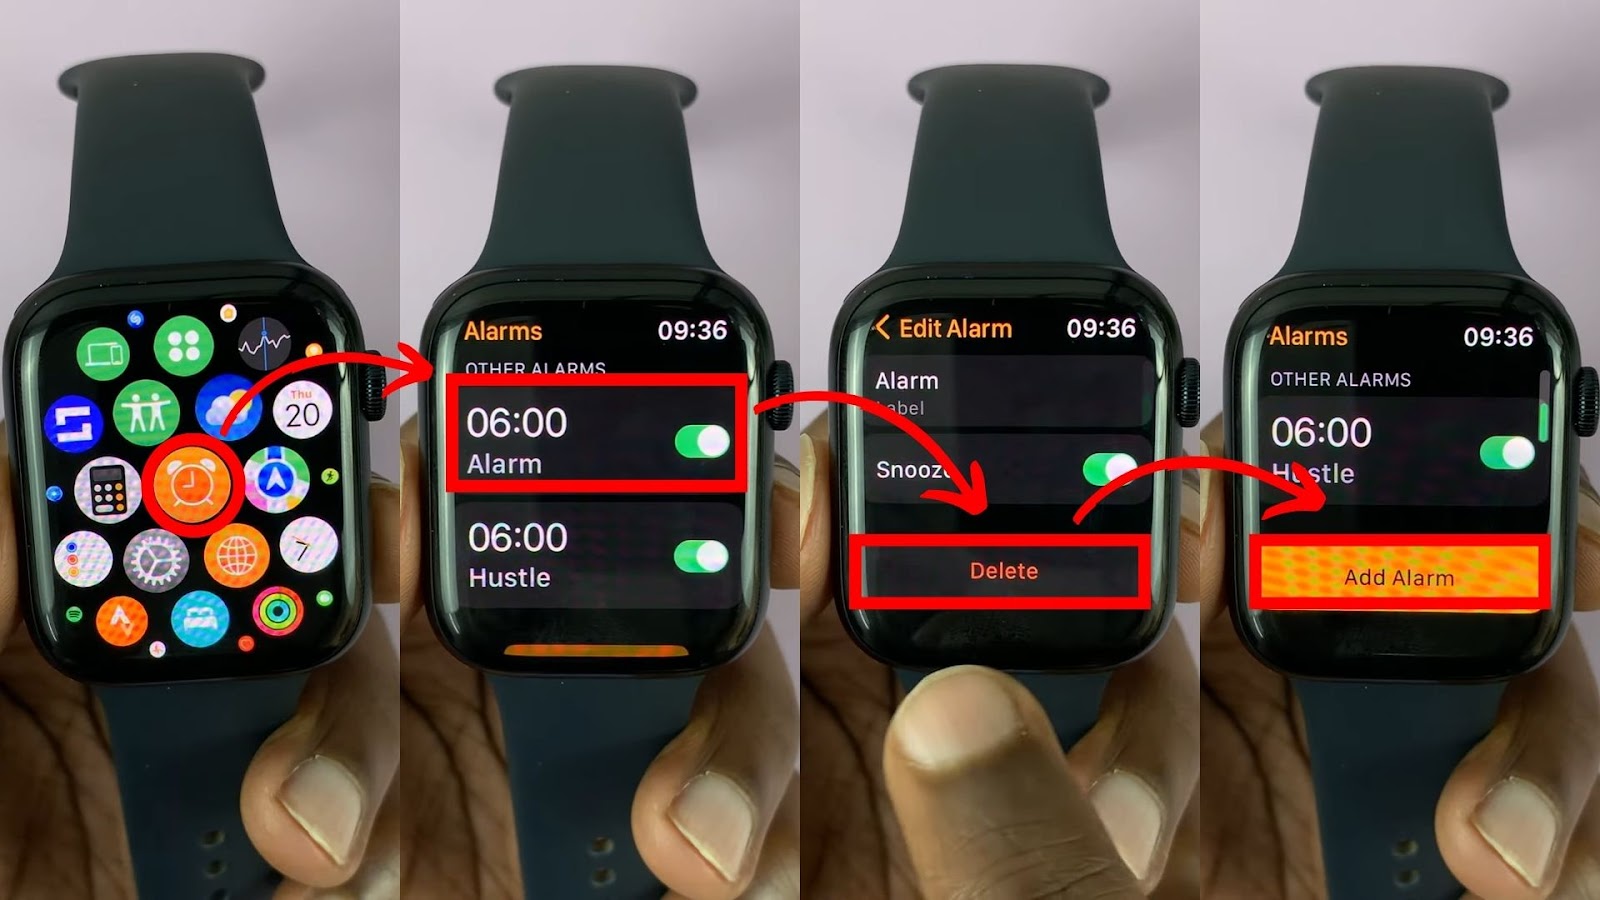 Apple Watch - Delete and Add Alarm